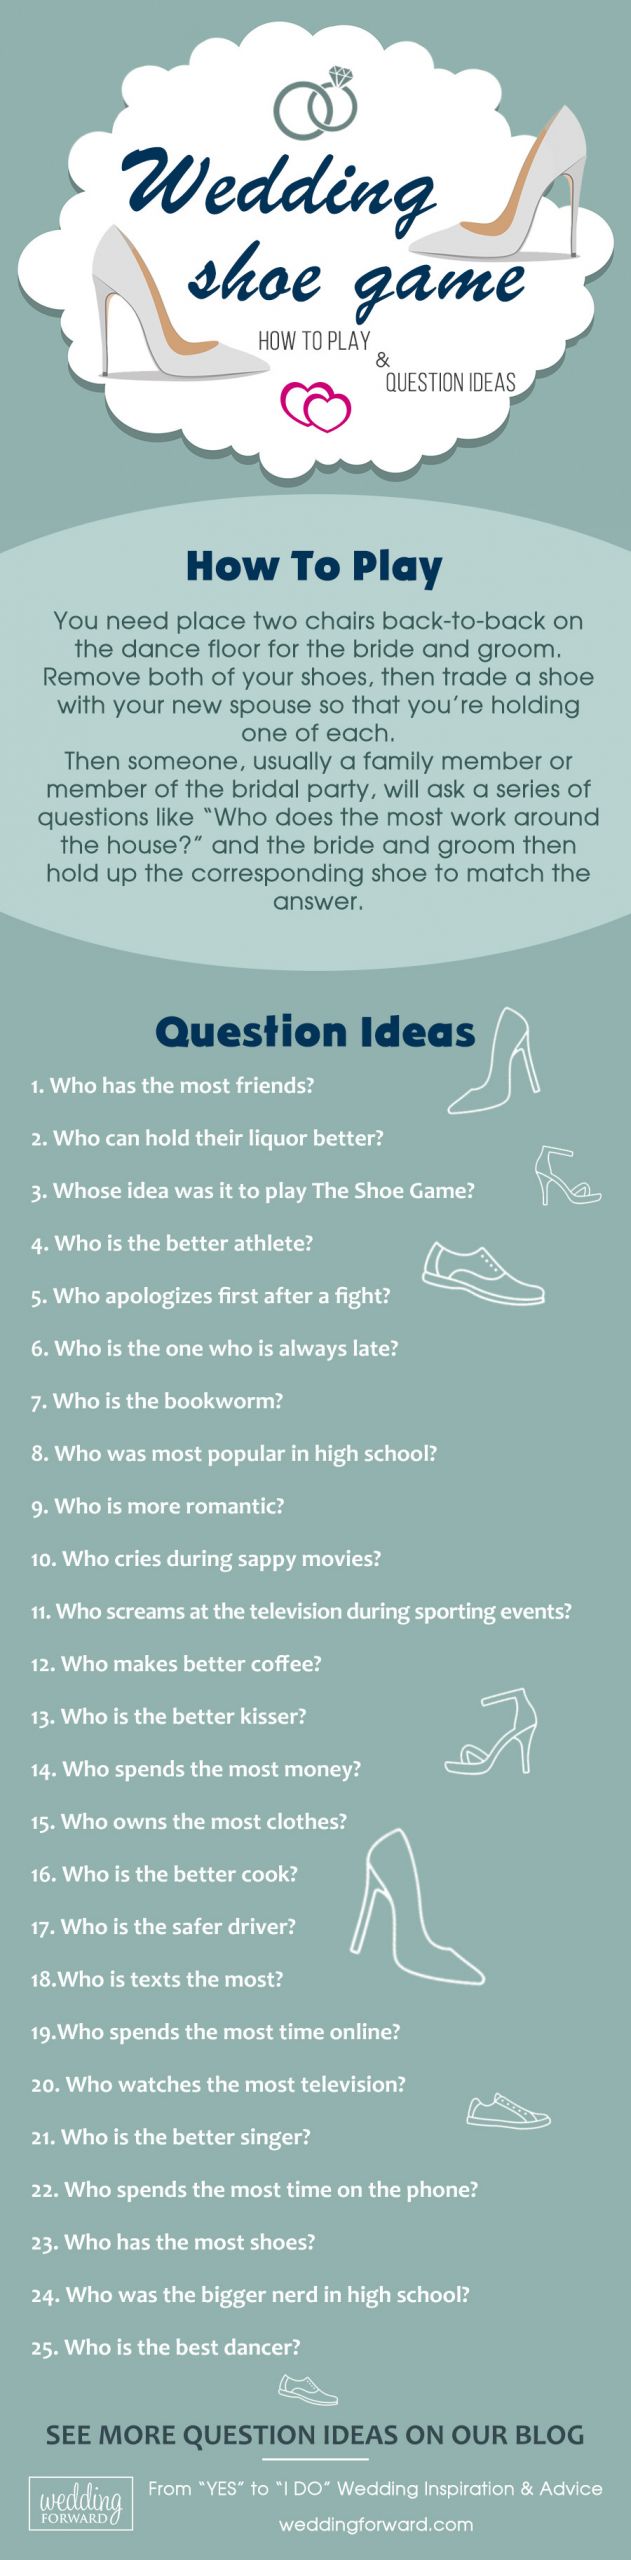 Wedding Shoe Game
 The Shoe Game – How To Play and Question Ideas